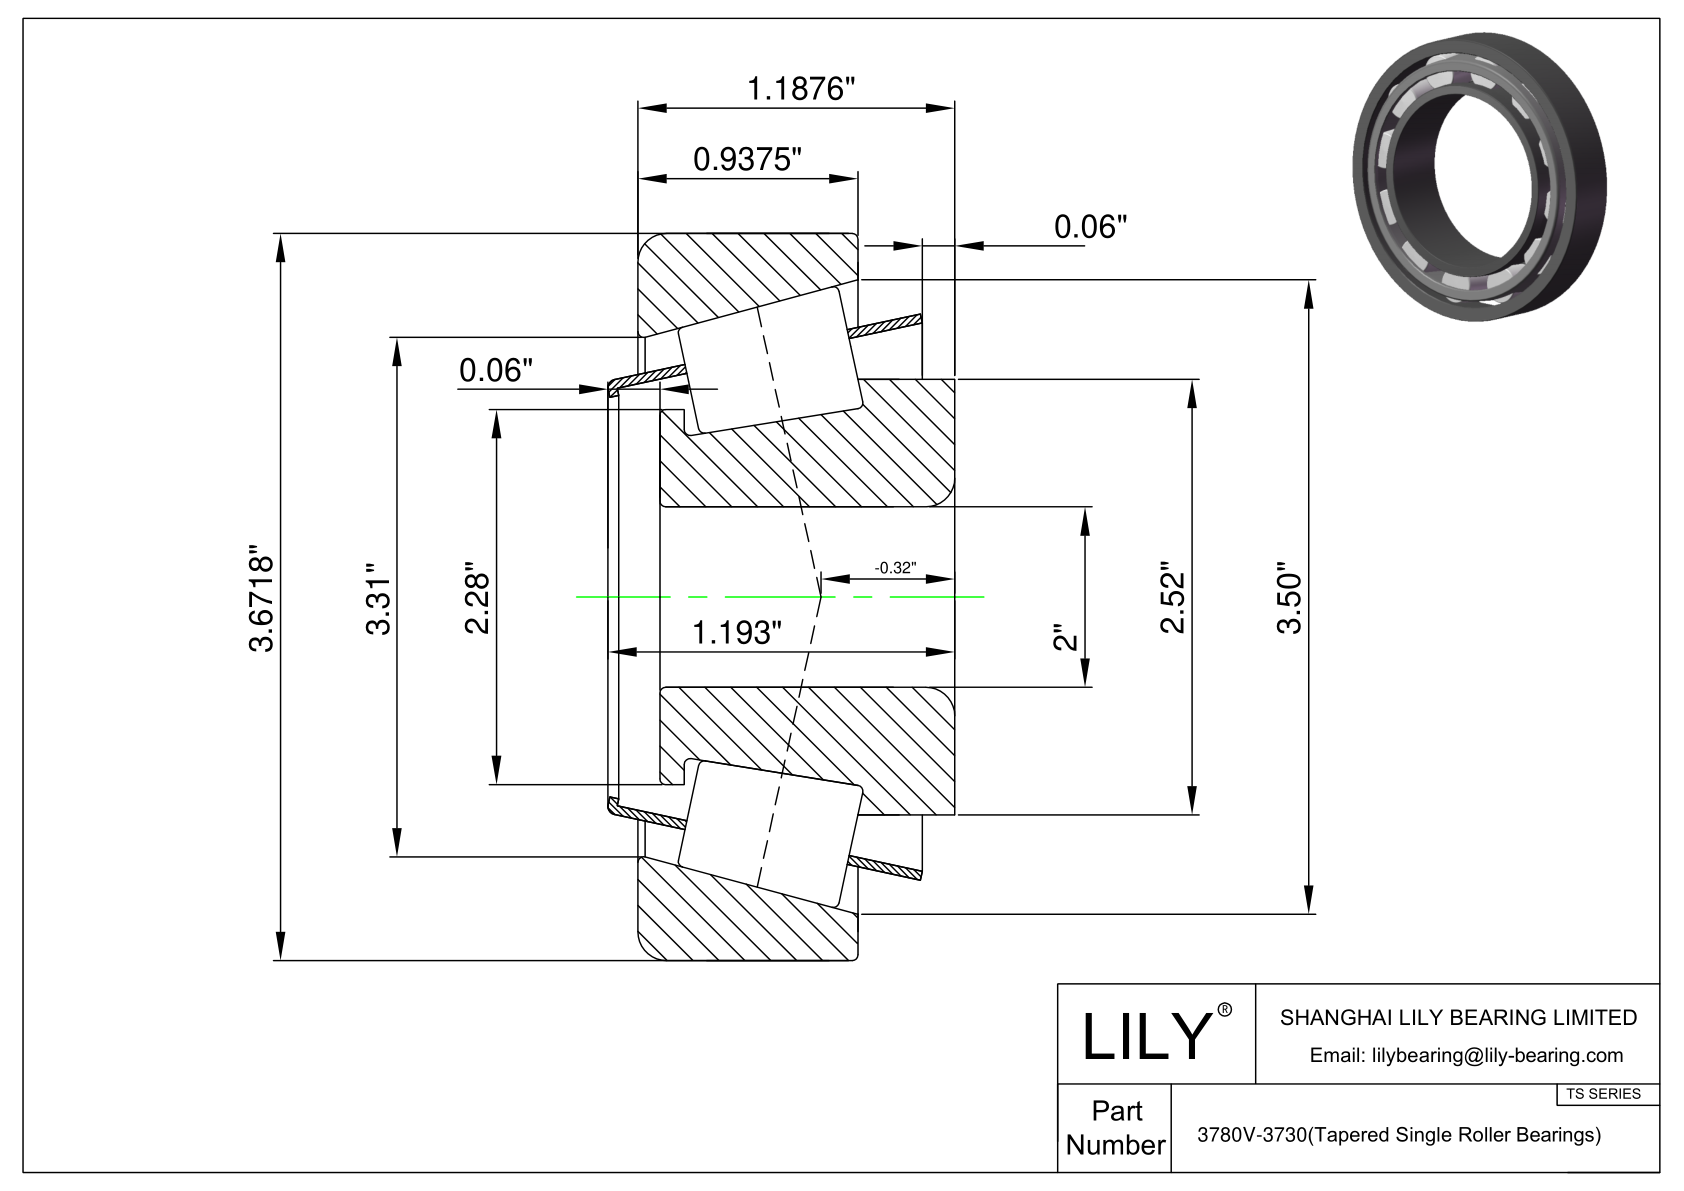 3780V-3730 TS (Tapered Single Roller Bearings) (Imperial) cad drawing